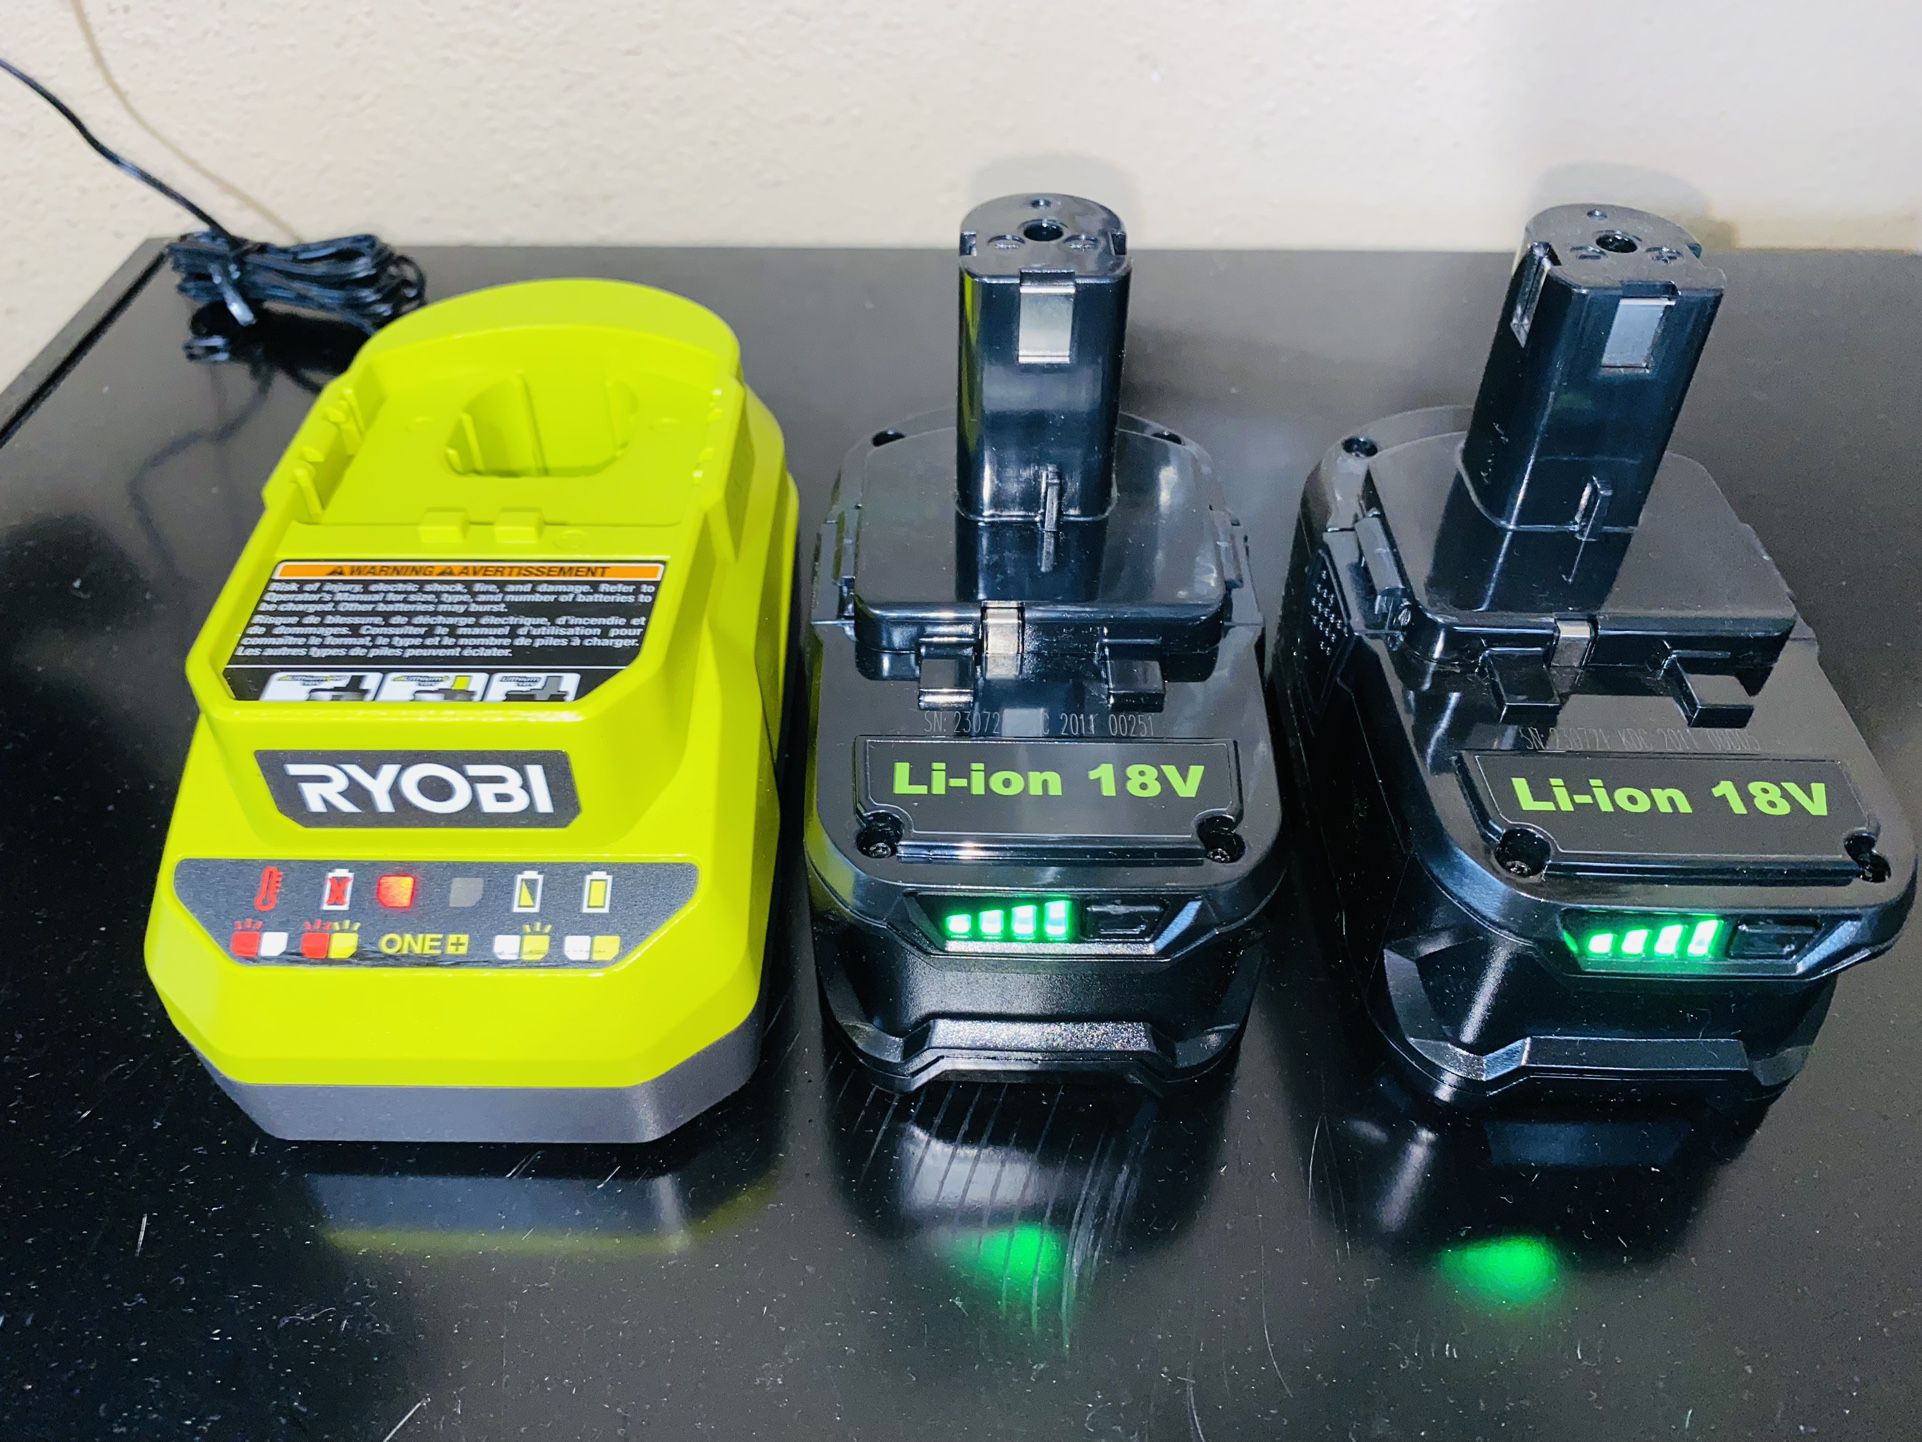 RYOBI 18V Volt ONE+ Battery Charger and 2 New Batteries generic 144wh (8.0AH)